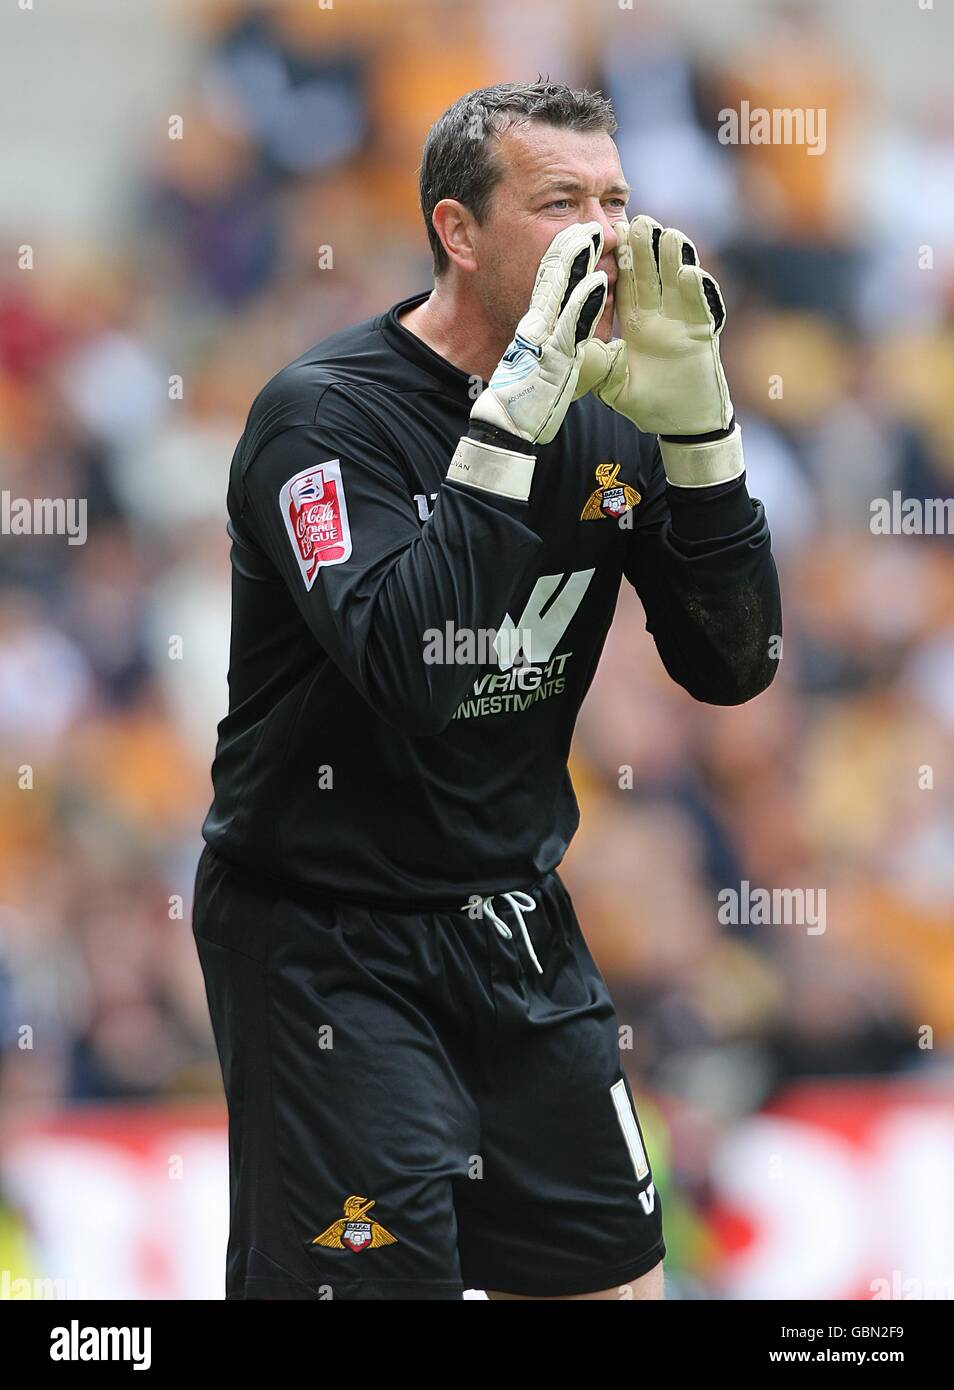 Soccer - Coca-Cola Football League Championship - Wolverhampton Wanderers v Doncaster Rovers - Molineux. Neil Sullivan, Doncaster Rovers goalkeeper Stock Photo